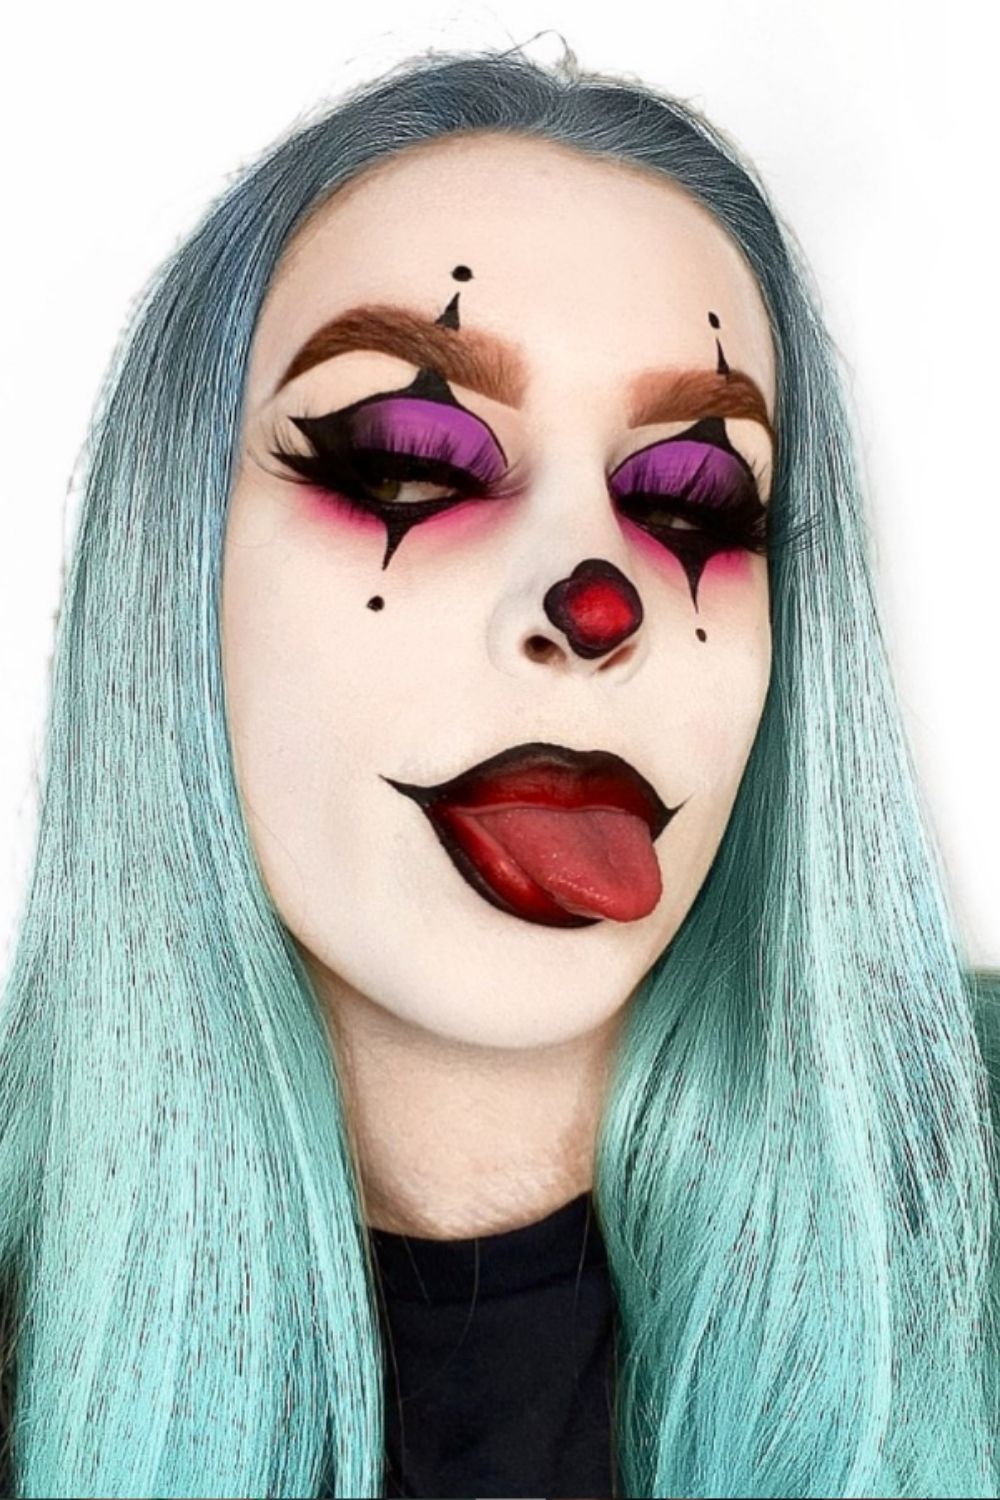 37 Brilliant Halloween Makeup Ideas to Try This Year in 2021